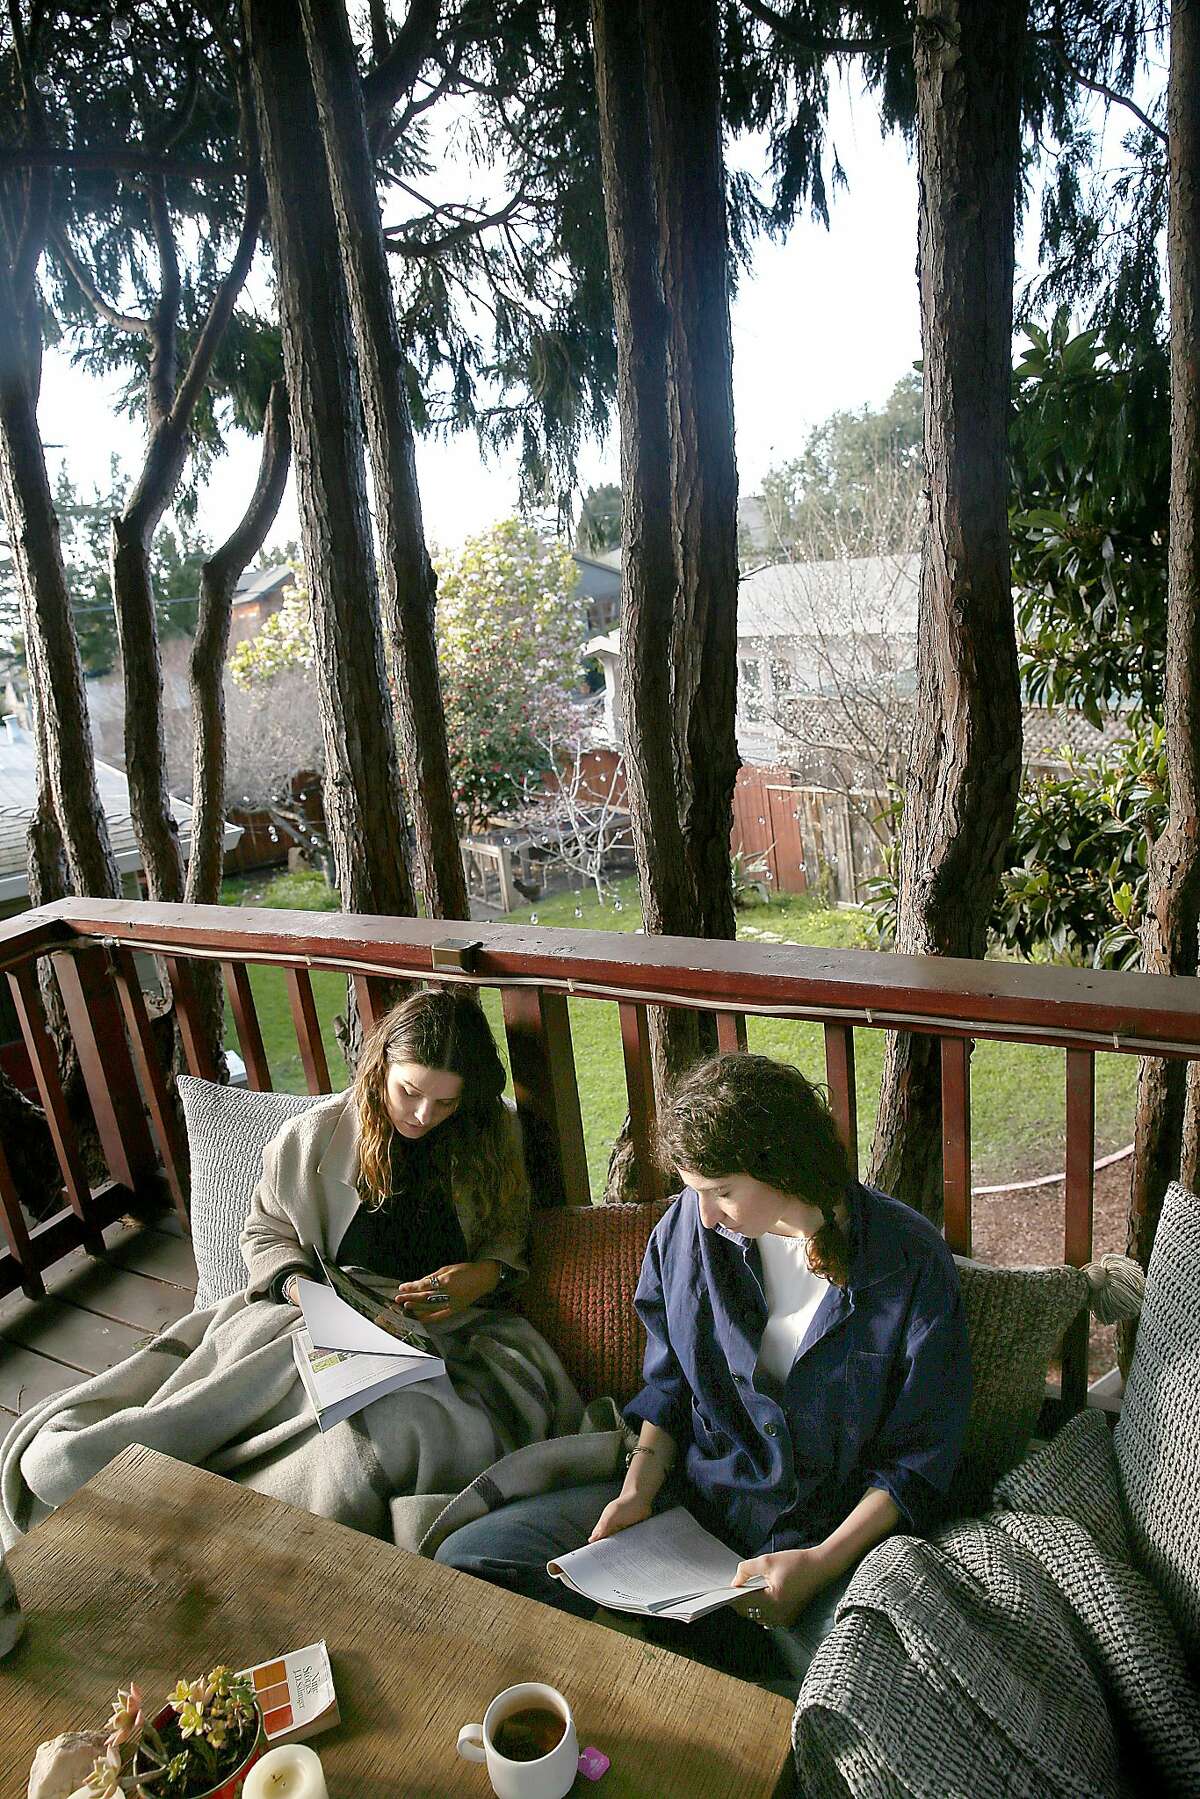 Lauren Tackberry and room mate Austin Sherman on the treehouse in the yard on Thursday, February 22, 2018, in Berkeley, Calif.